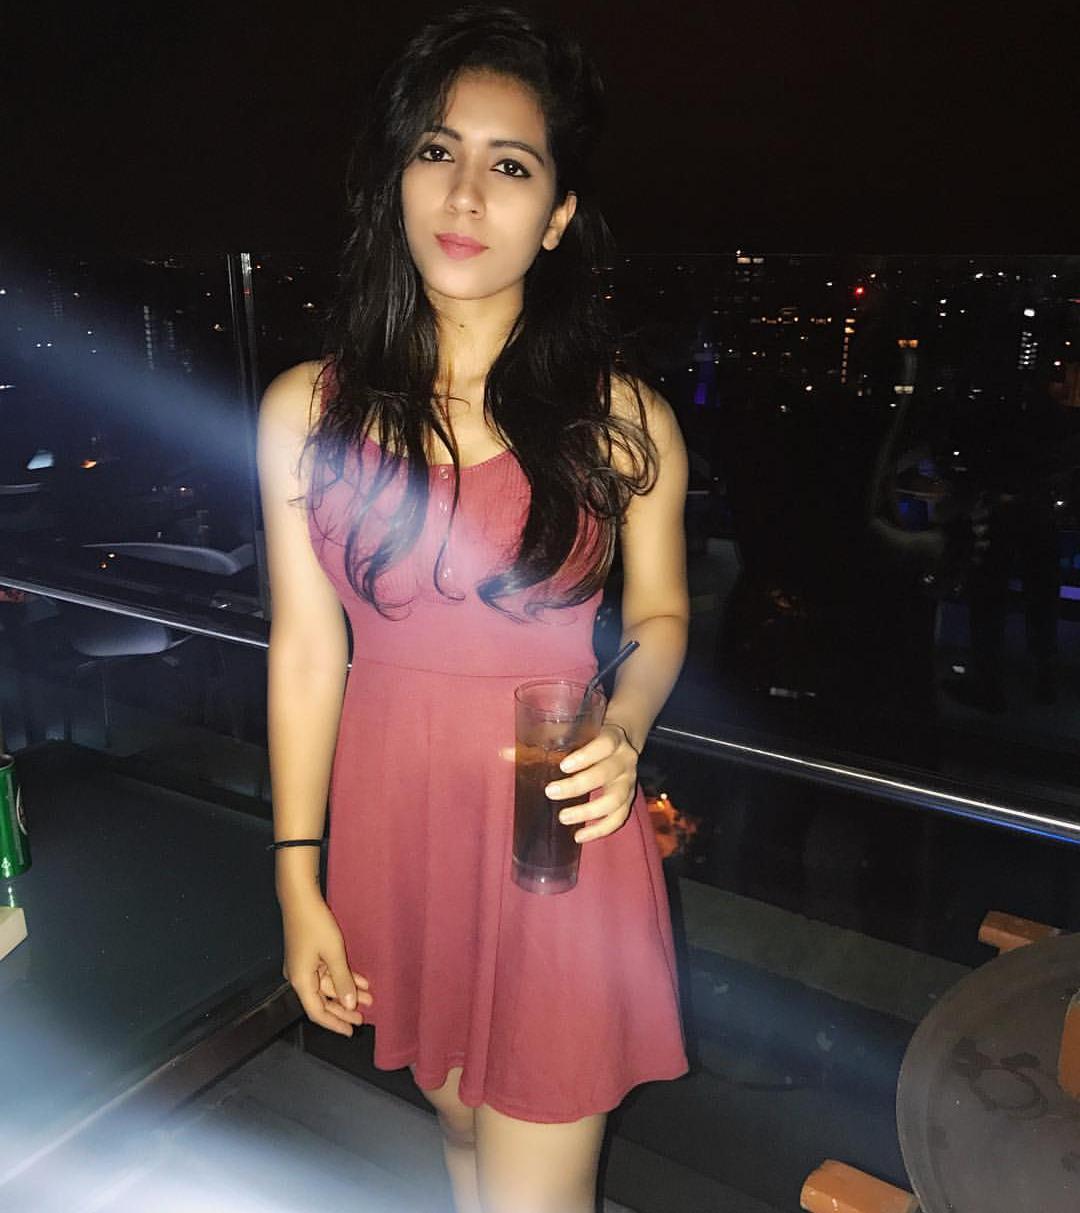 NO ADVANCE DIRECT PAYMENT GENUINE SERVICE CALL GIRL ALL BANGLORE 